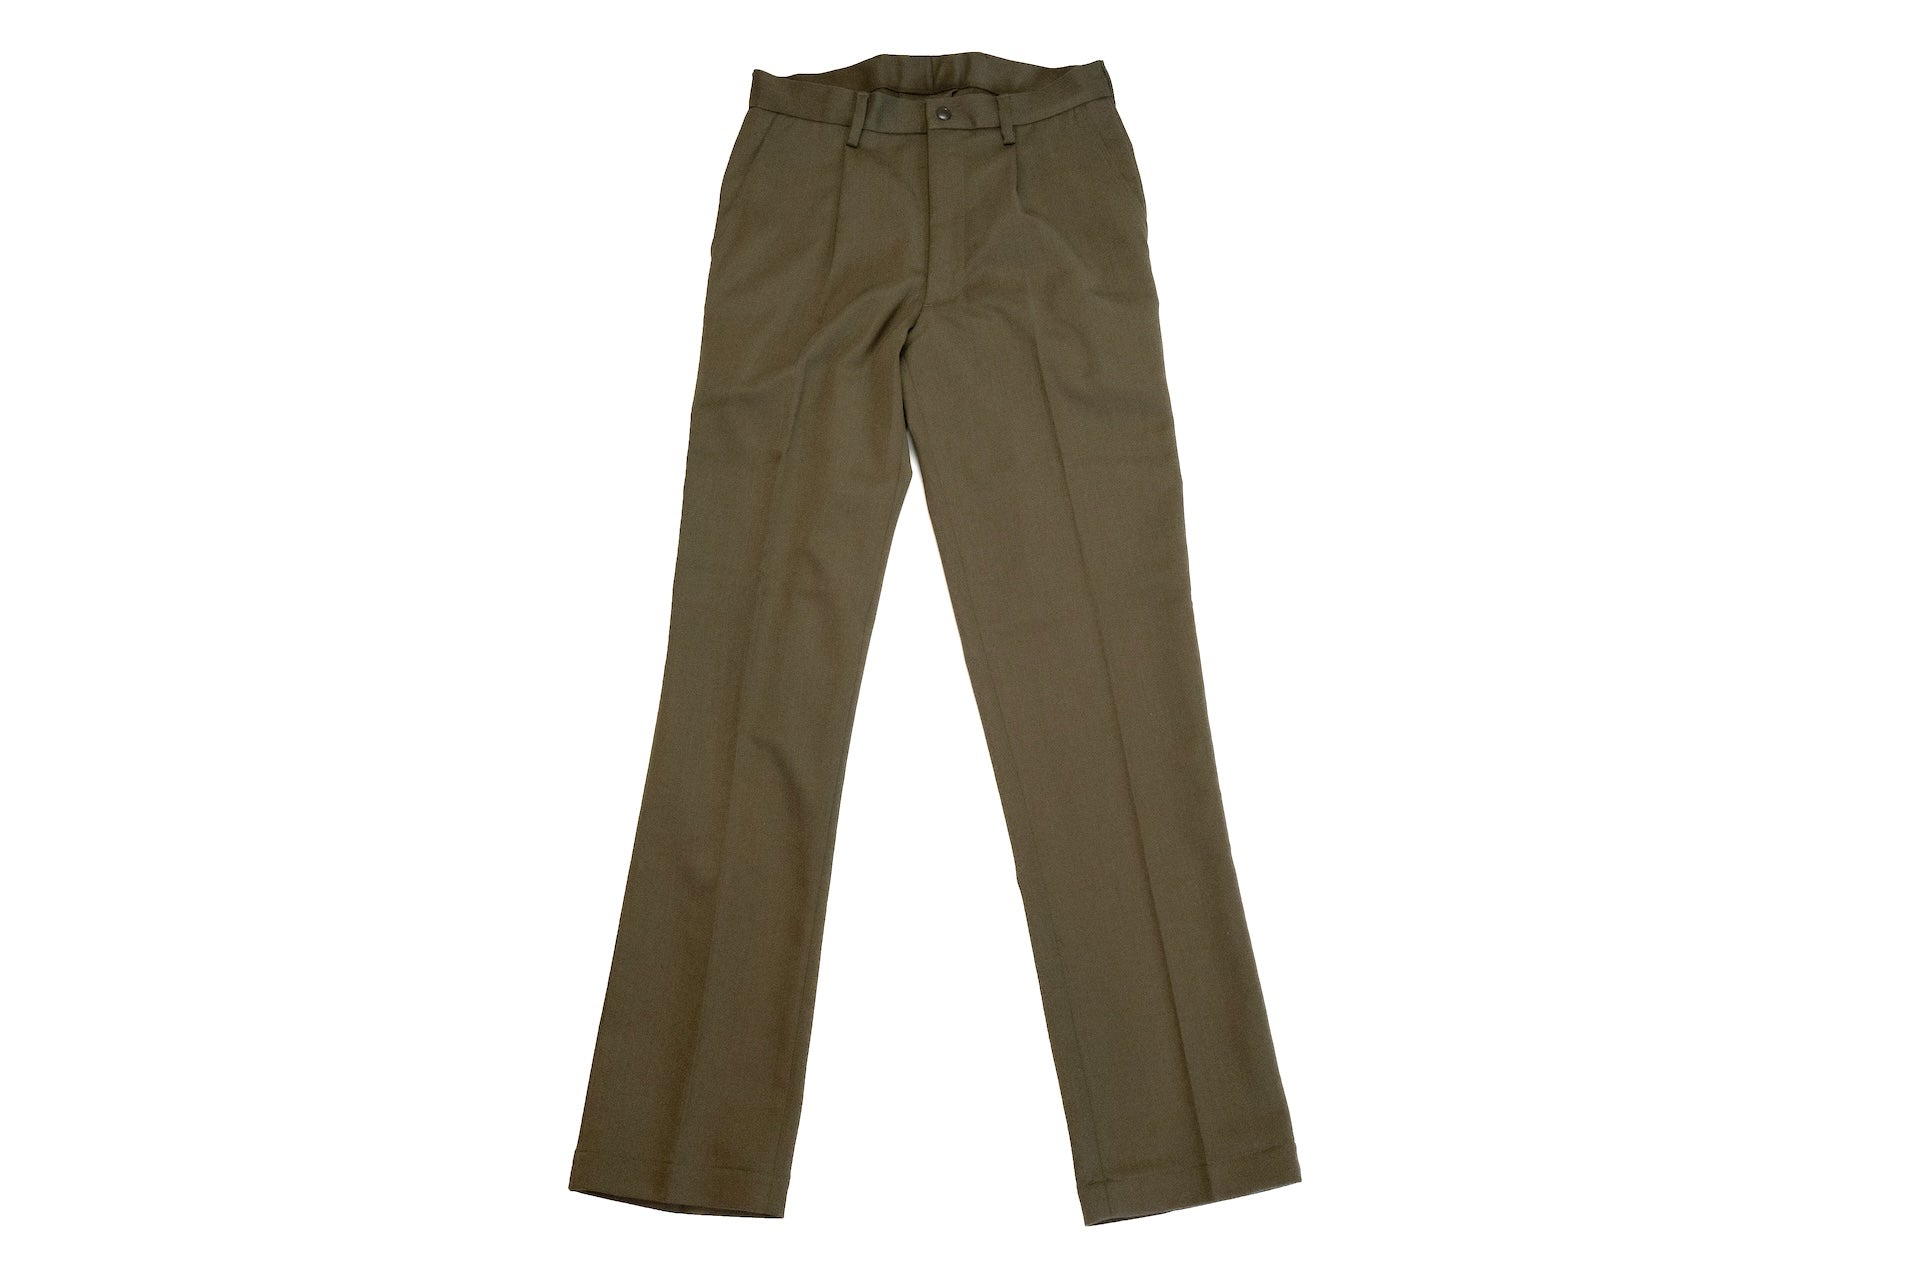 Ultima Thule by Freewheelers "Breeze" Versatile Trousers (Olive Drab)